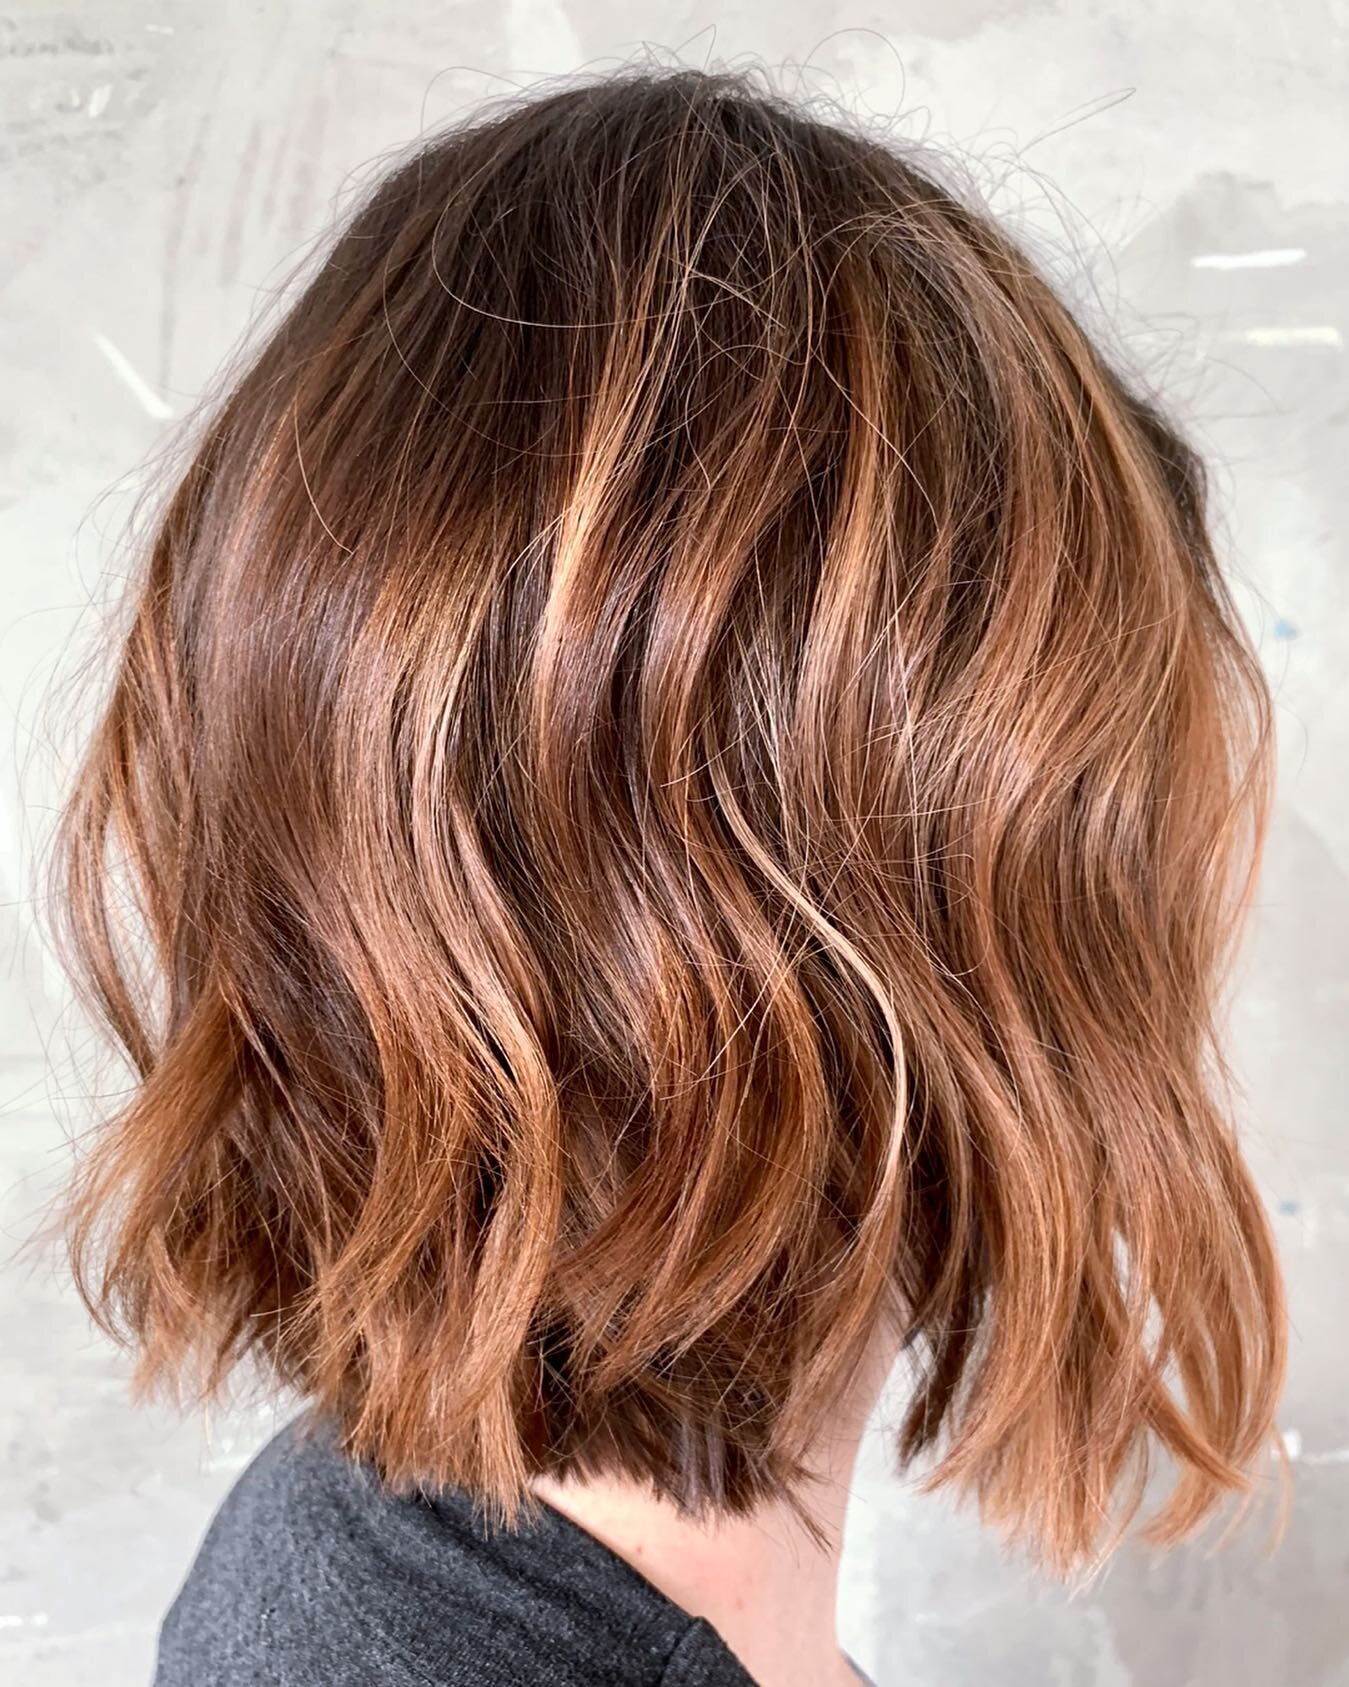 Dimensional copper bob by @topknottresses redheads can have fun with their color too! 🤗